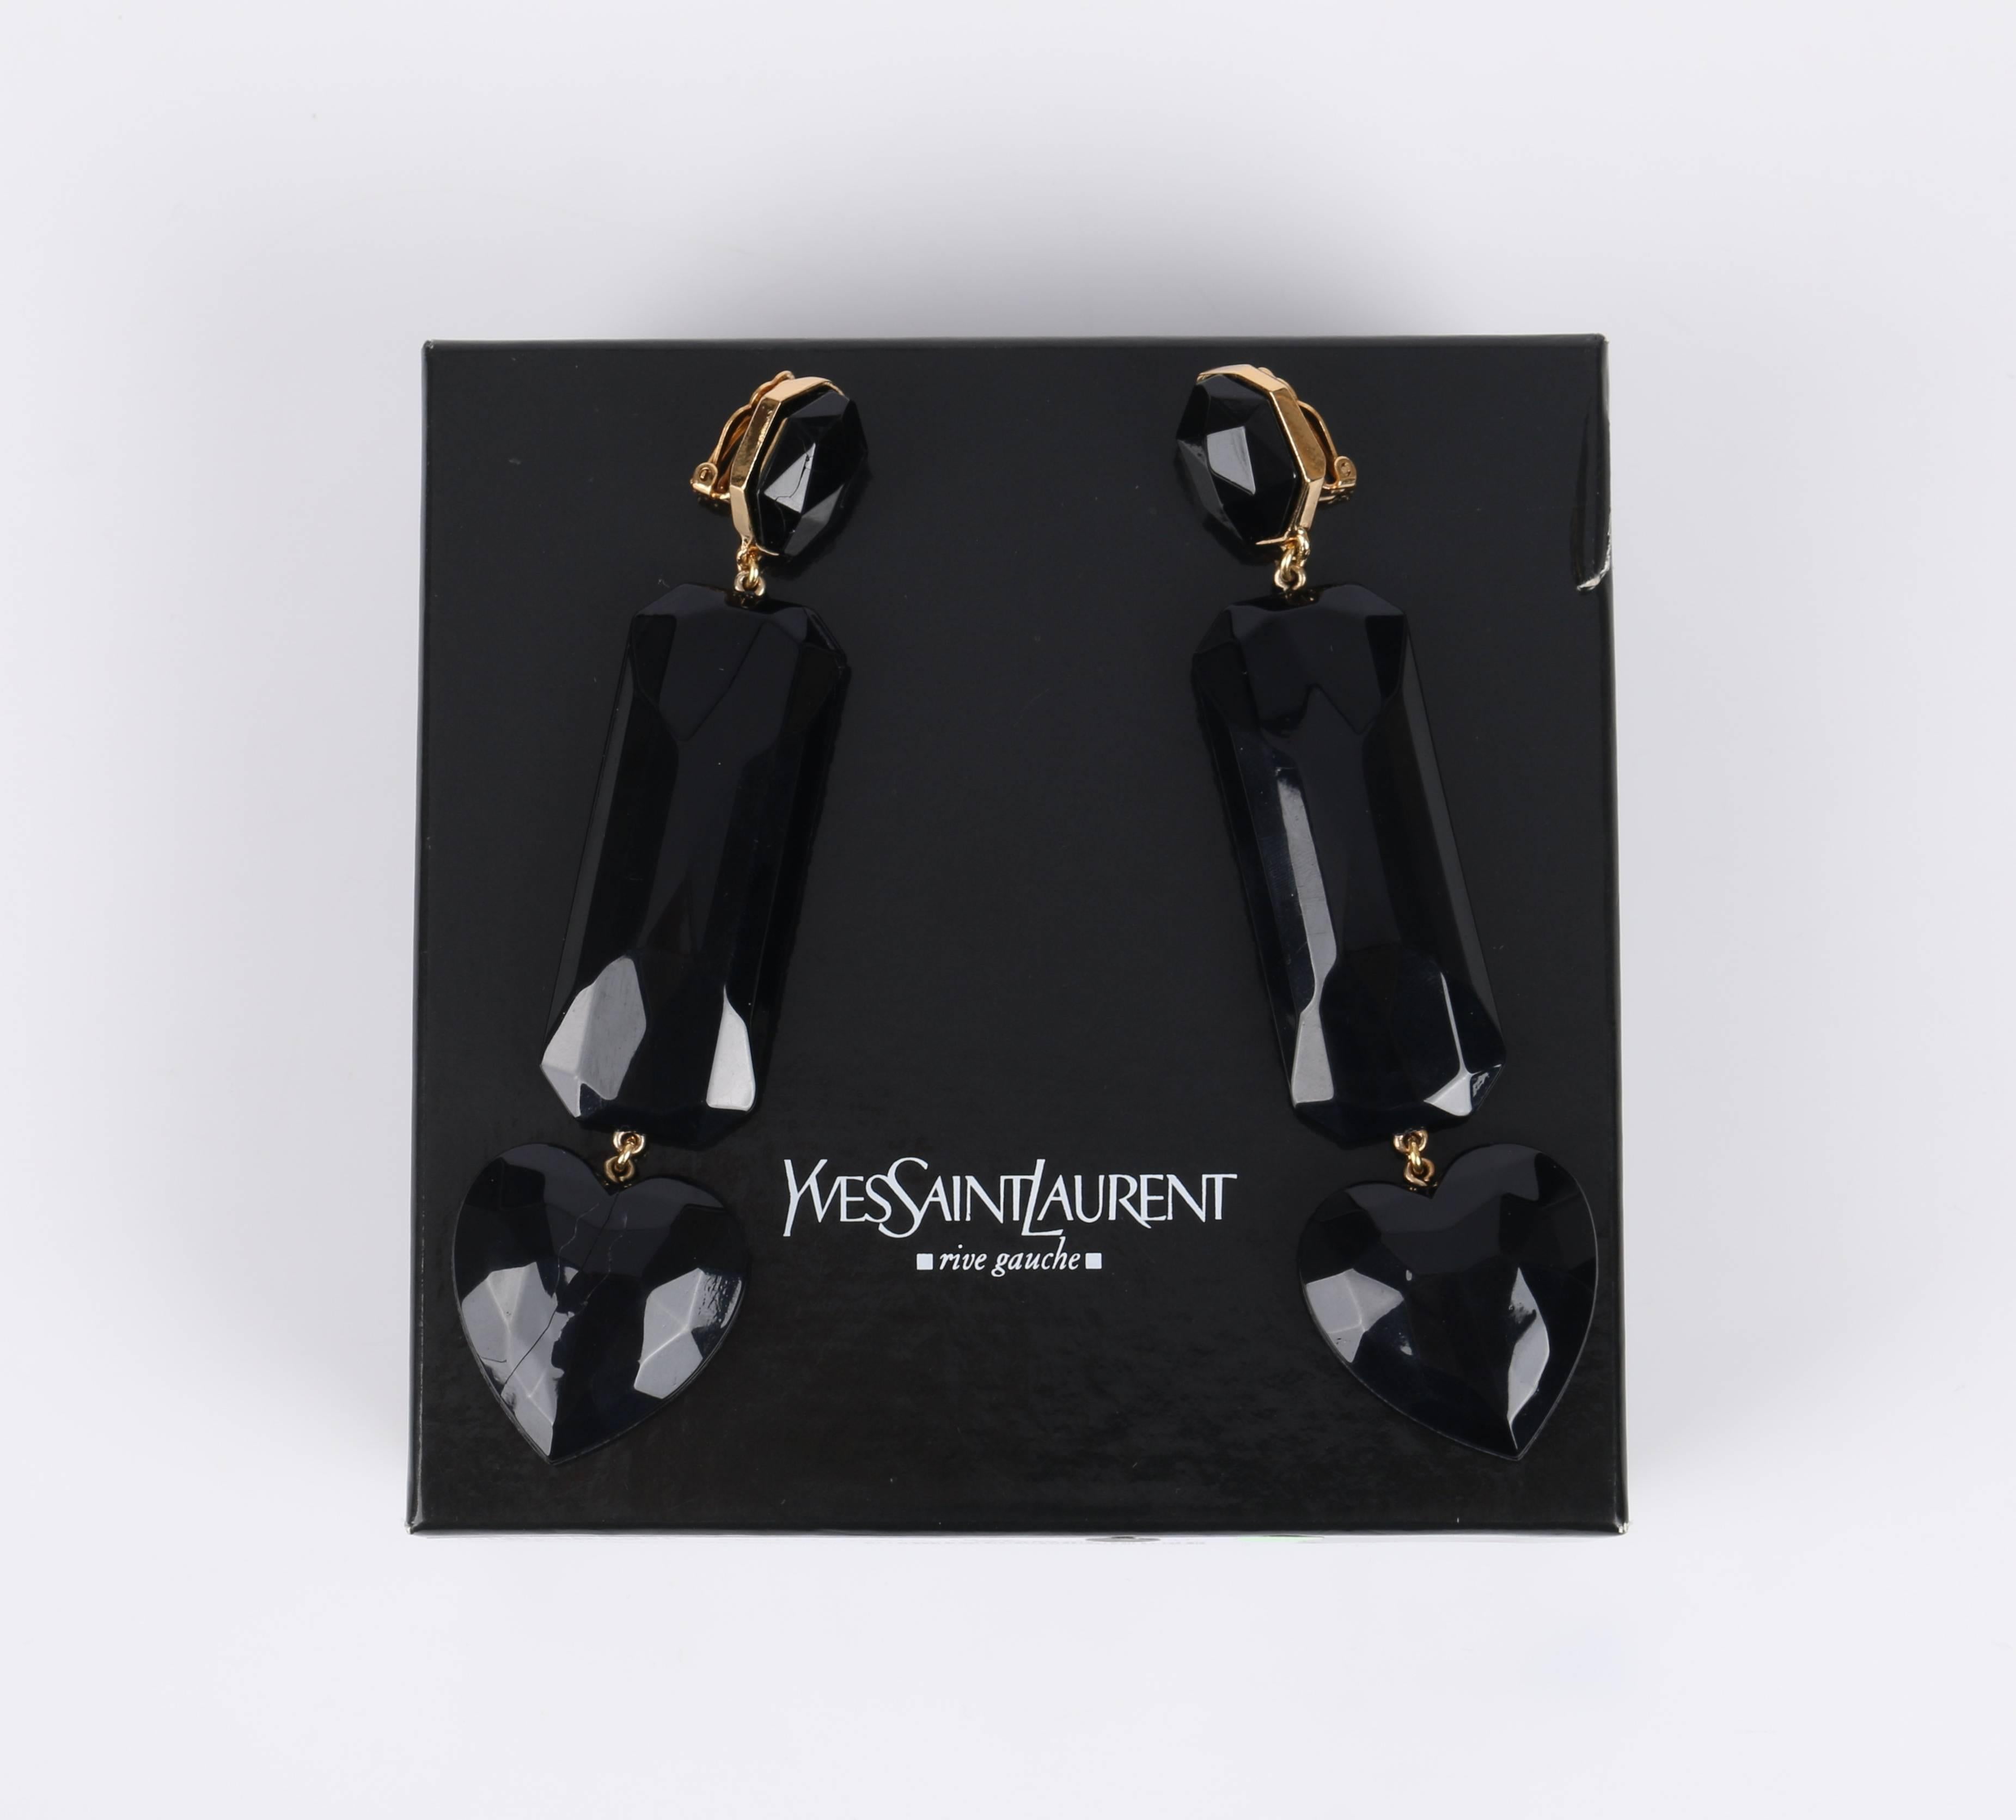 Yves Saint Laurent Rive Gauche black gem drop earrings. Large resin cast heart, rectangle, and octagon faceted gems. Gold-toned metal links and setting with clip on backing. Earrings are marked 